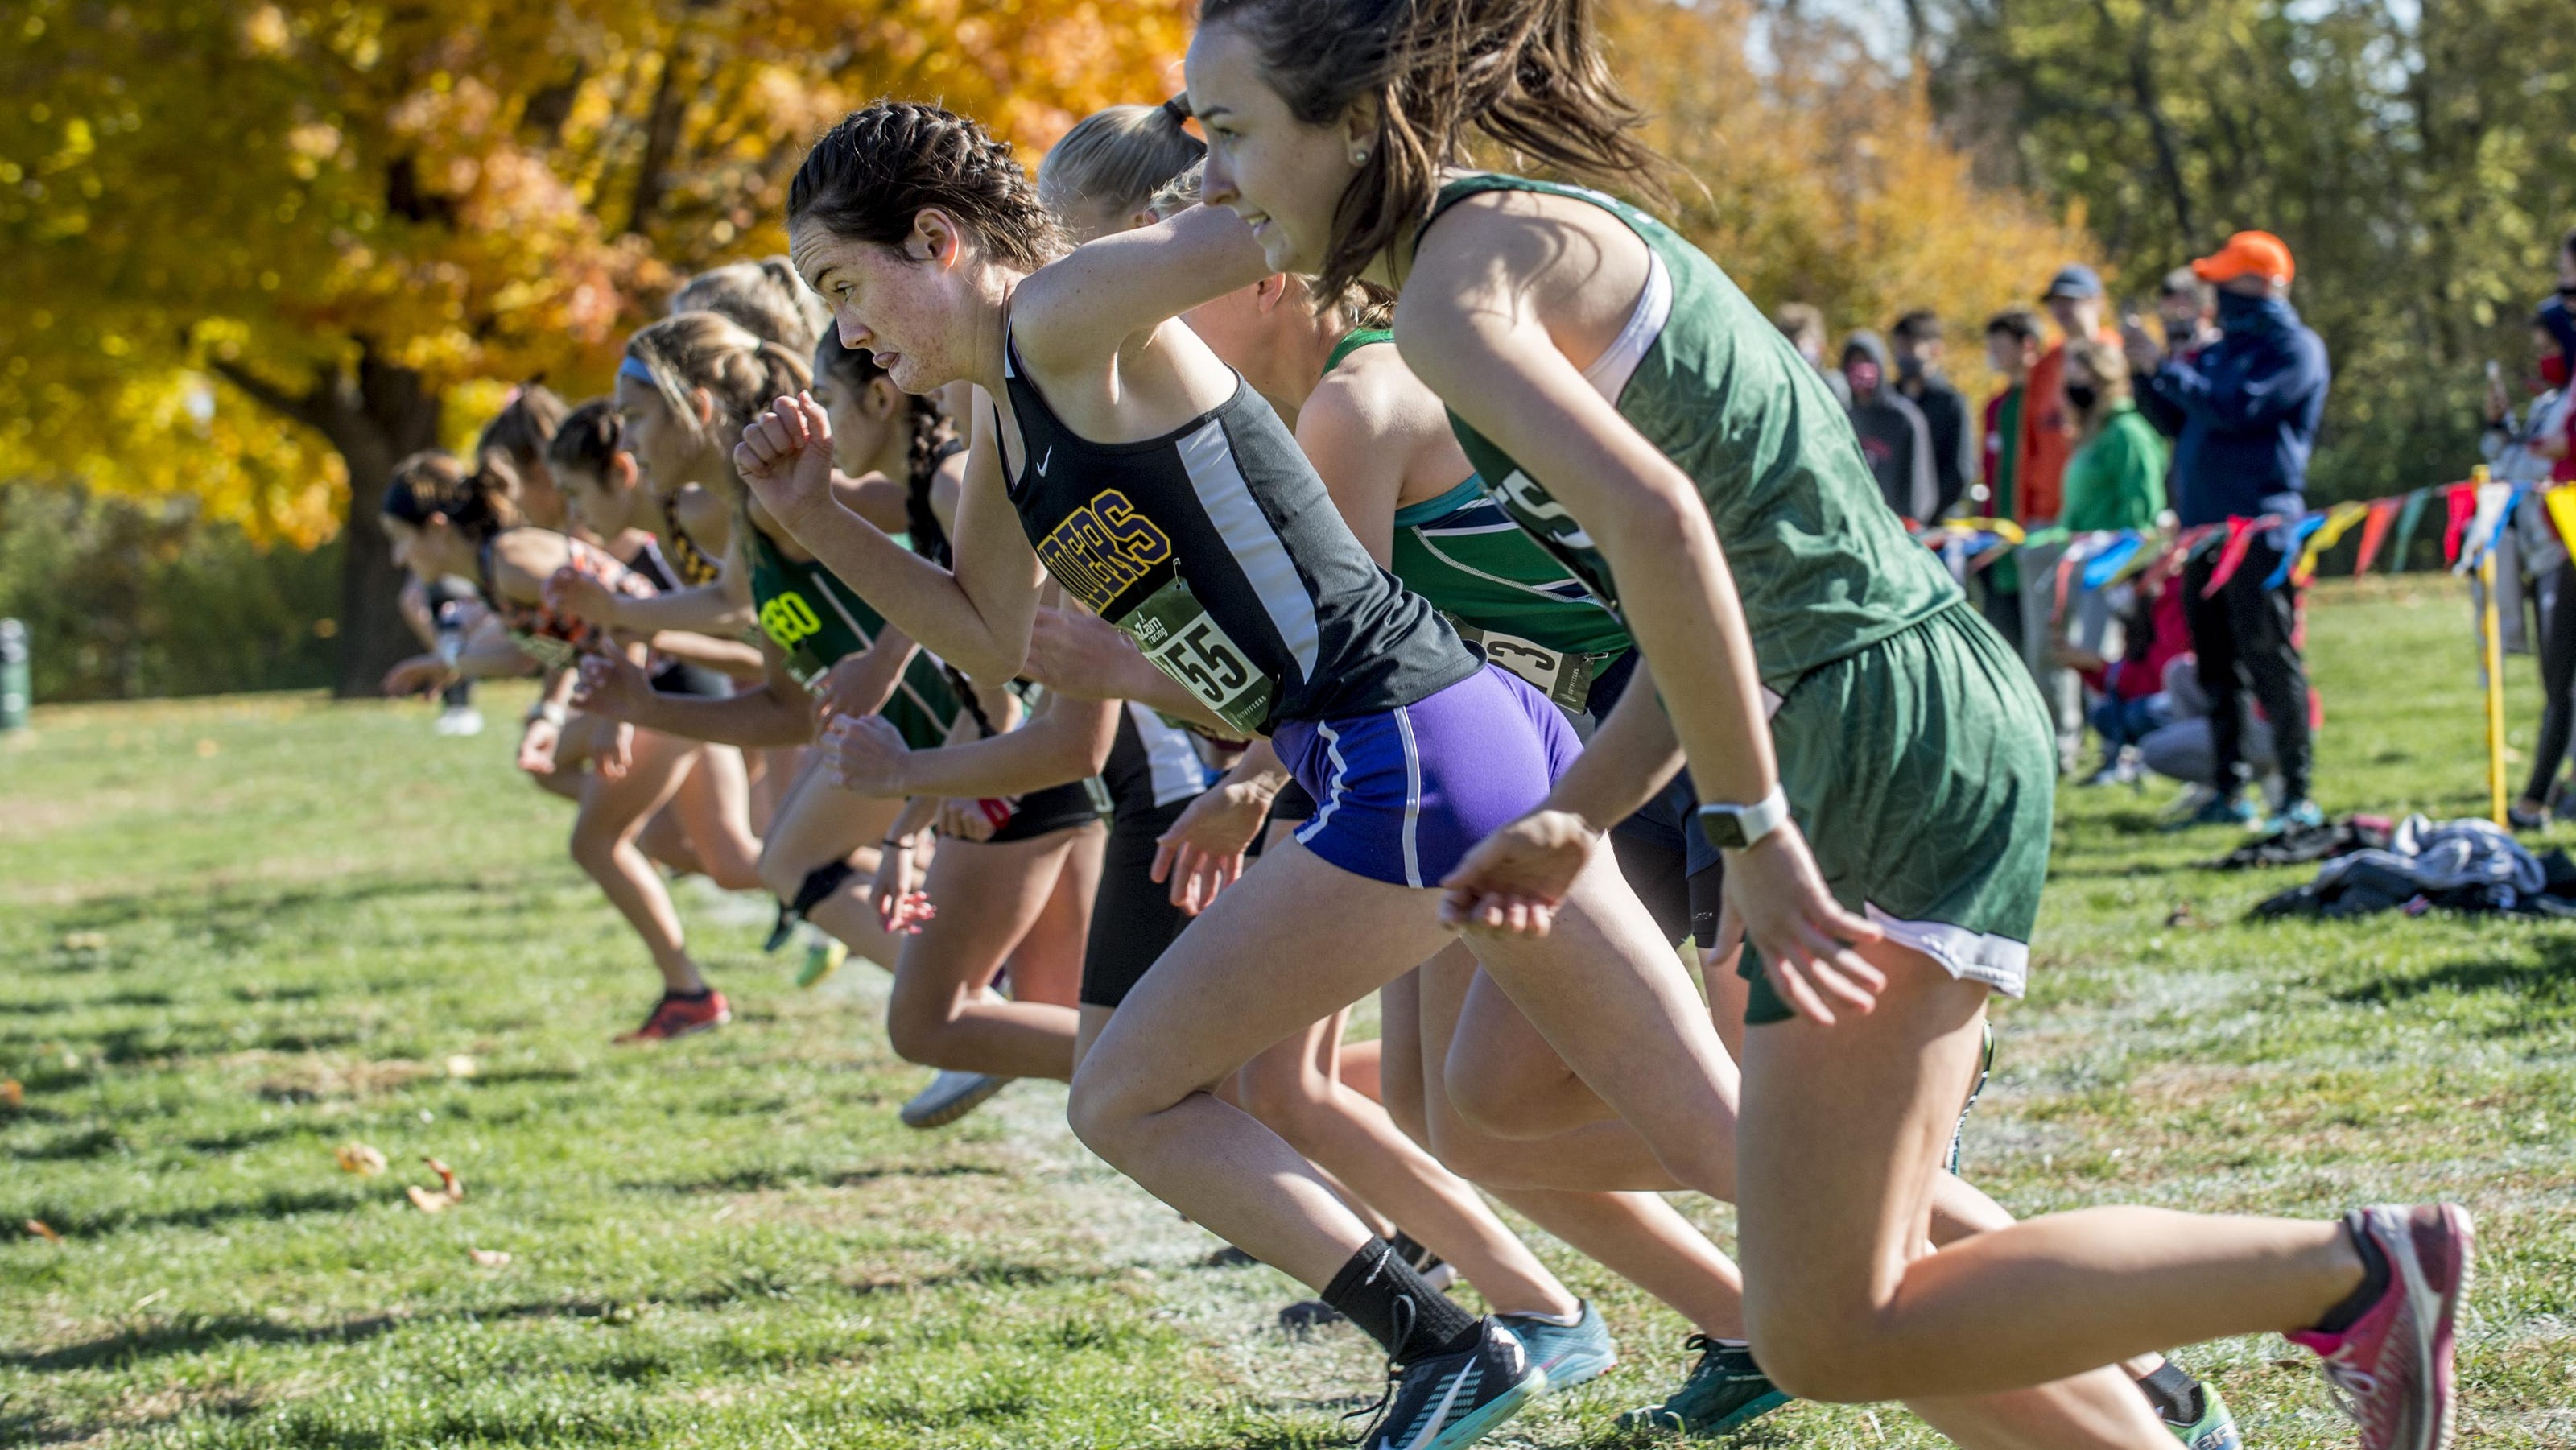   
																Here are the Peoria-area cross country runners heading to IHSA sectionals 
															 